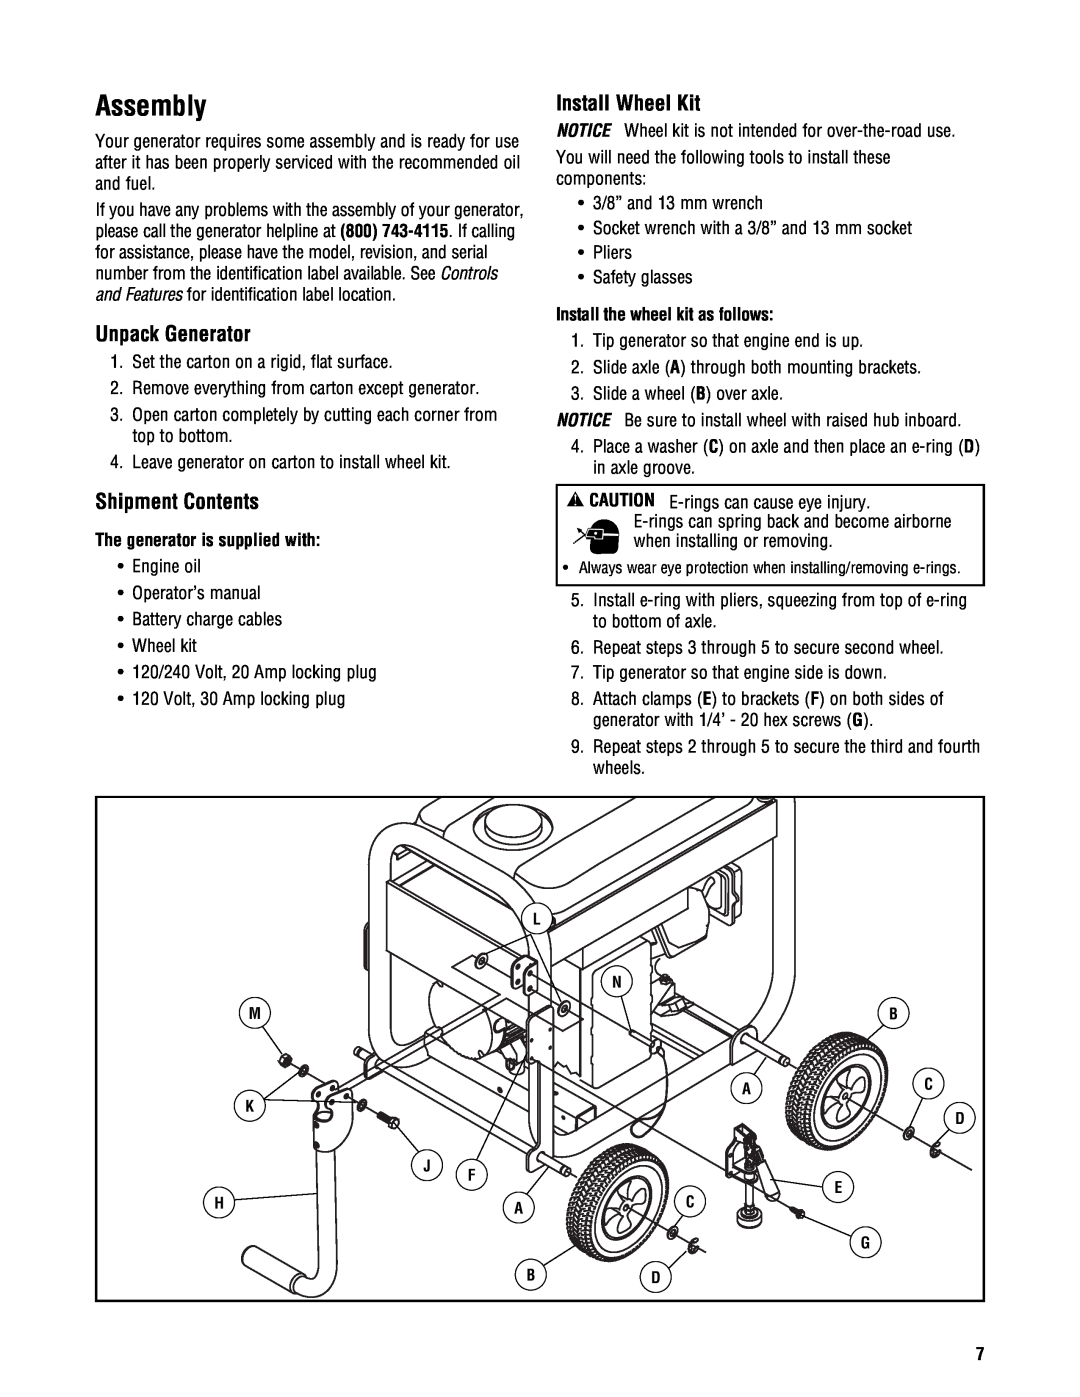 Briggs & Stratton PRO4000 Assembly, Install Wheel Kit, Unpack Generator, Shipment Contents, The generator is supplied with 